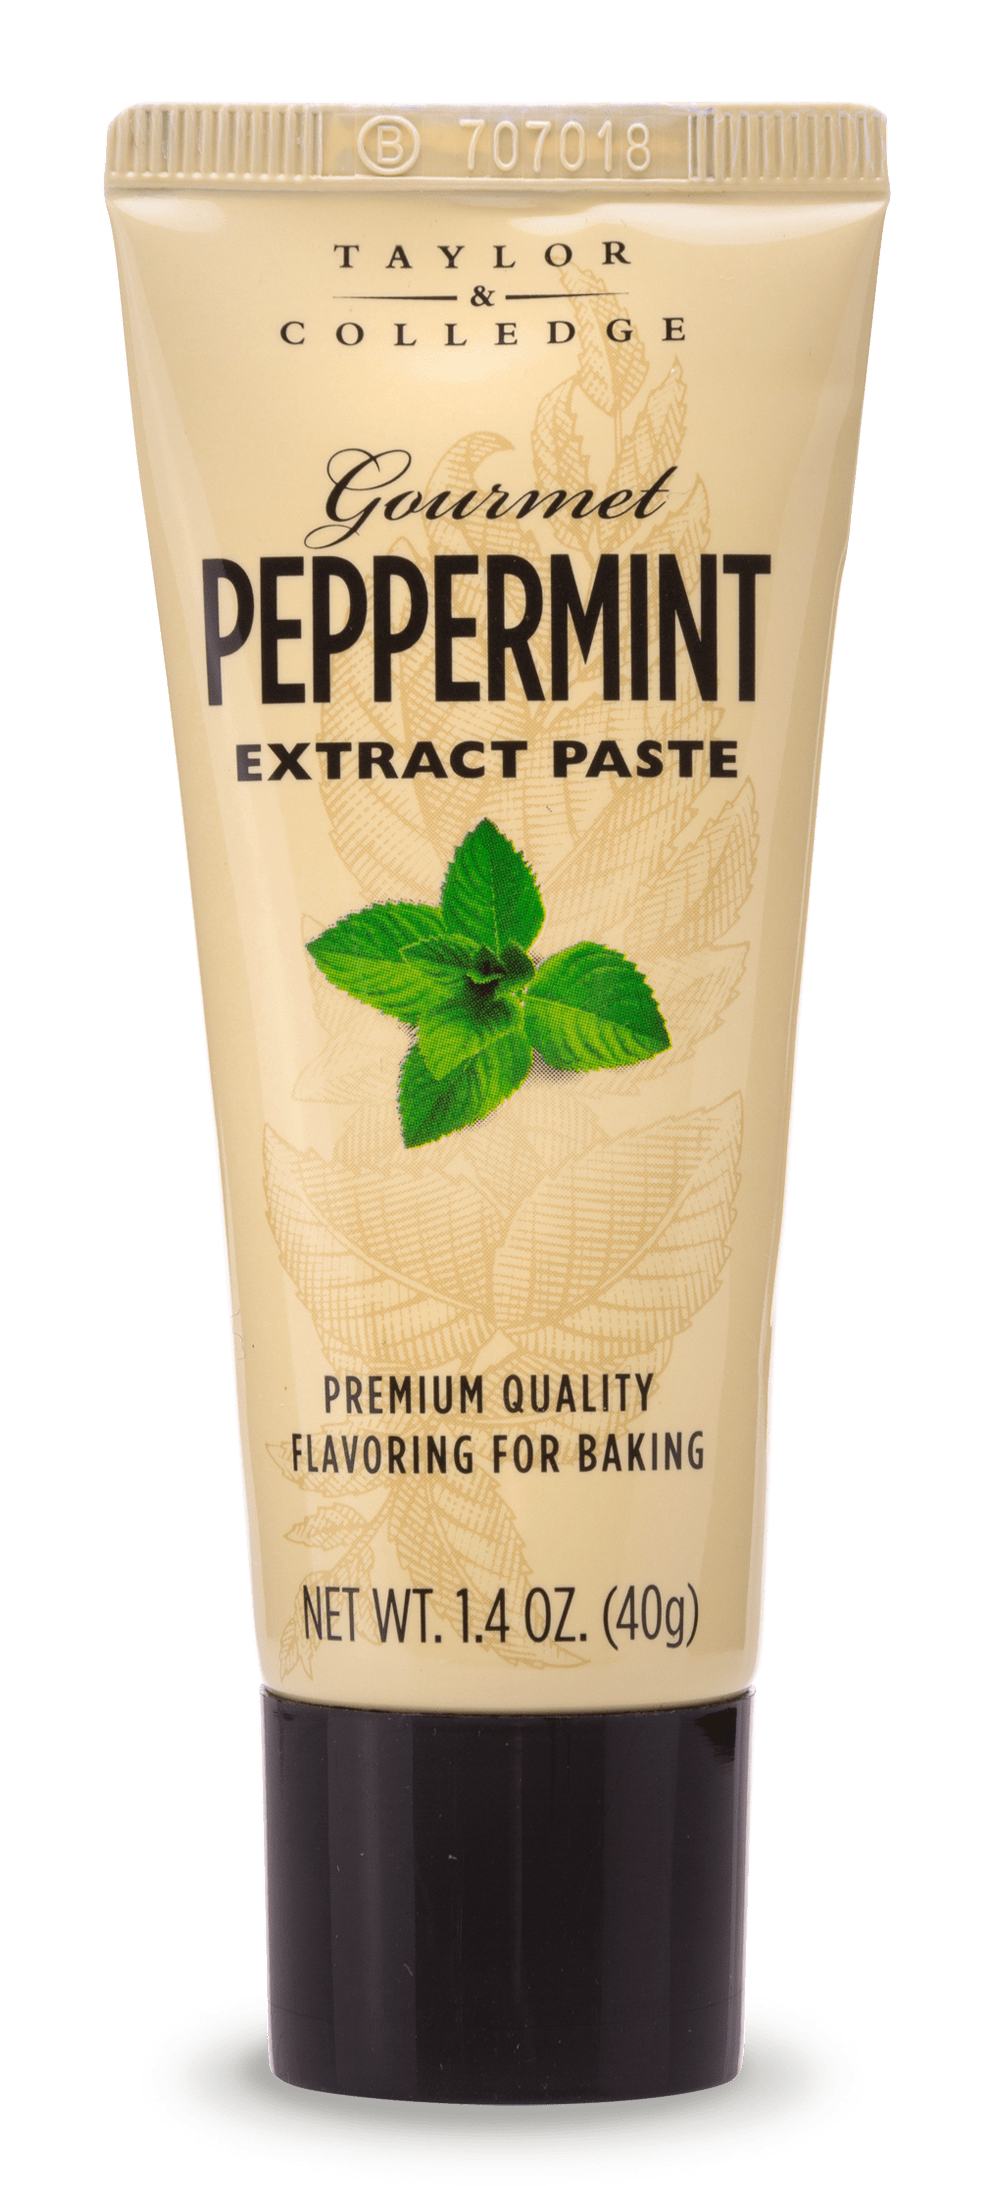 Gourmet Peppermint Extract Paste - Taylor and Colledge